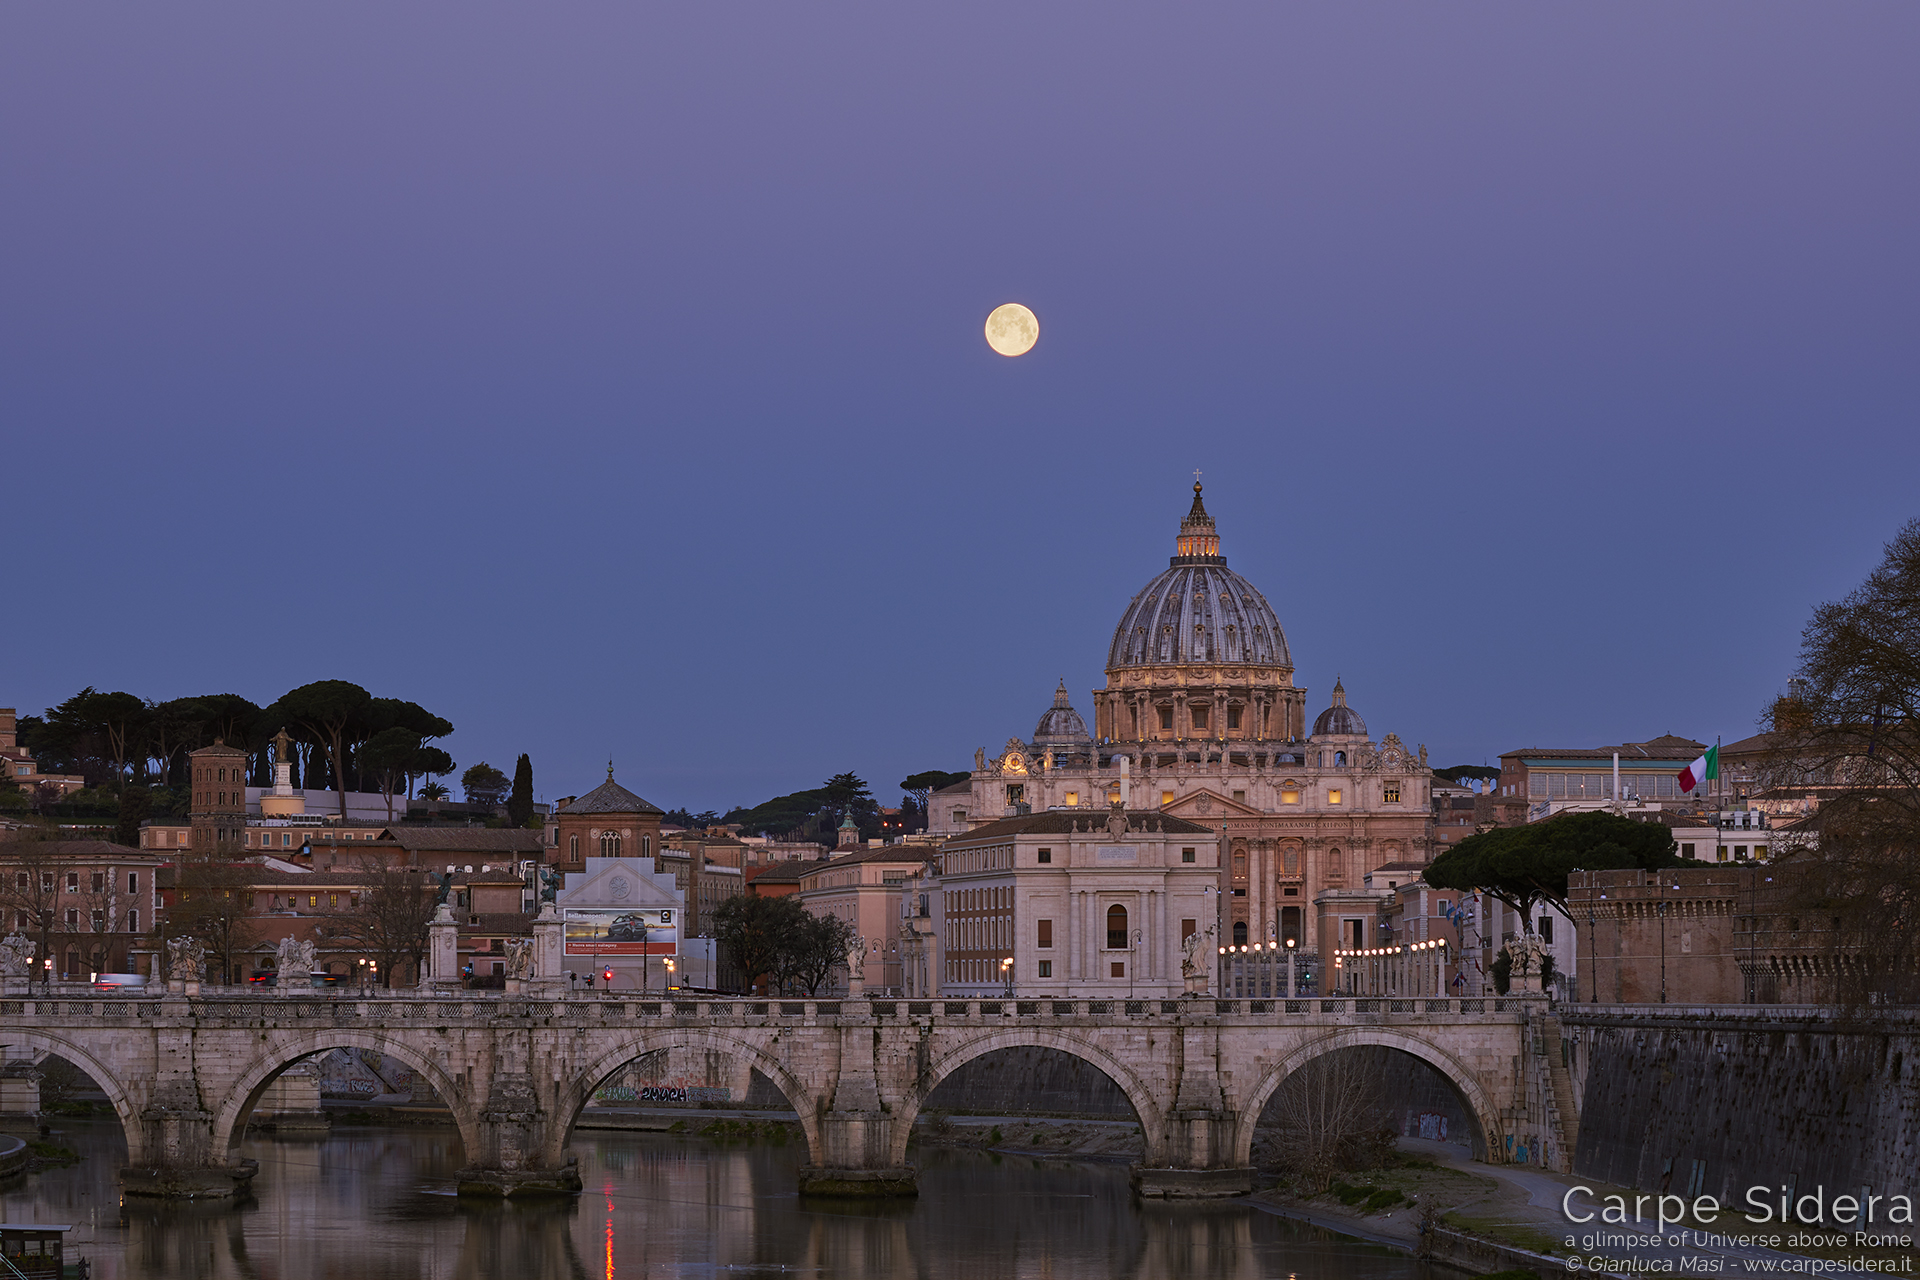 The Equinox Supermoon hangs above St. Peter's Dome in Rome - 21 March. 2019